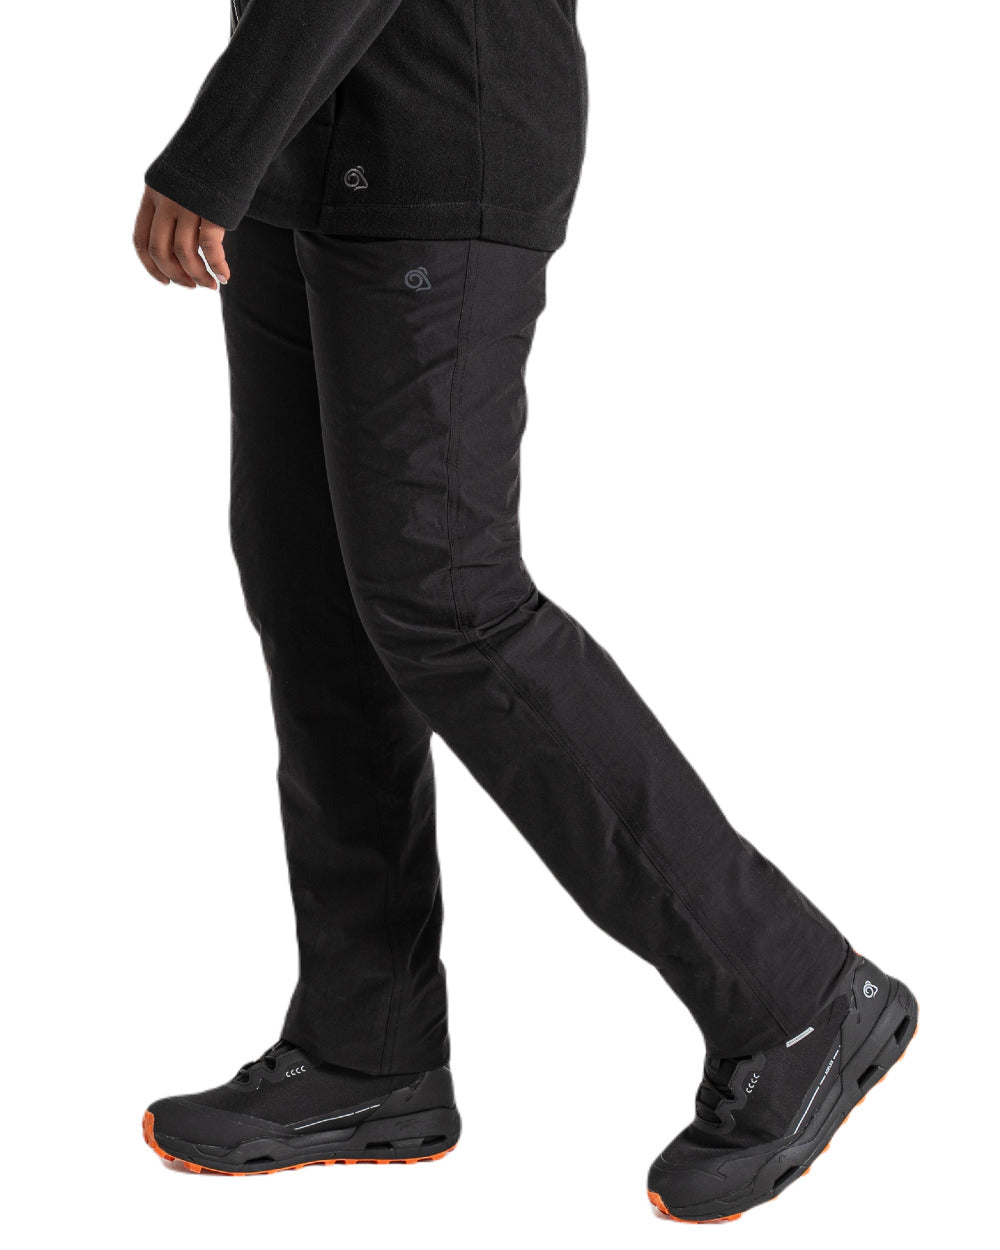 Shop Craghoppers Men's Waterproof Trousers up to 70% Off | DealDoodle